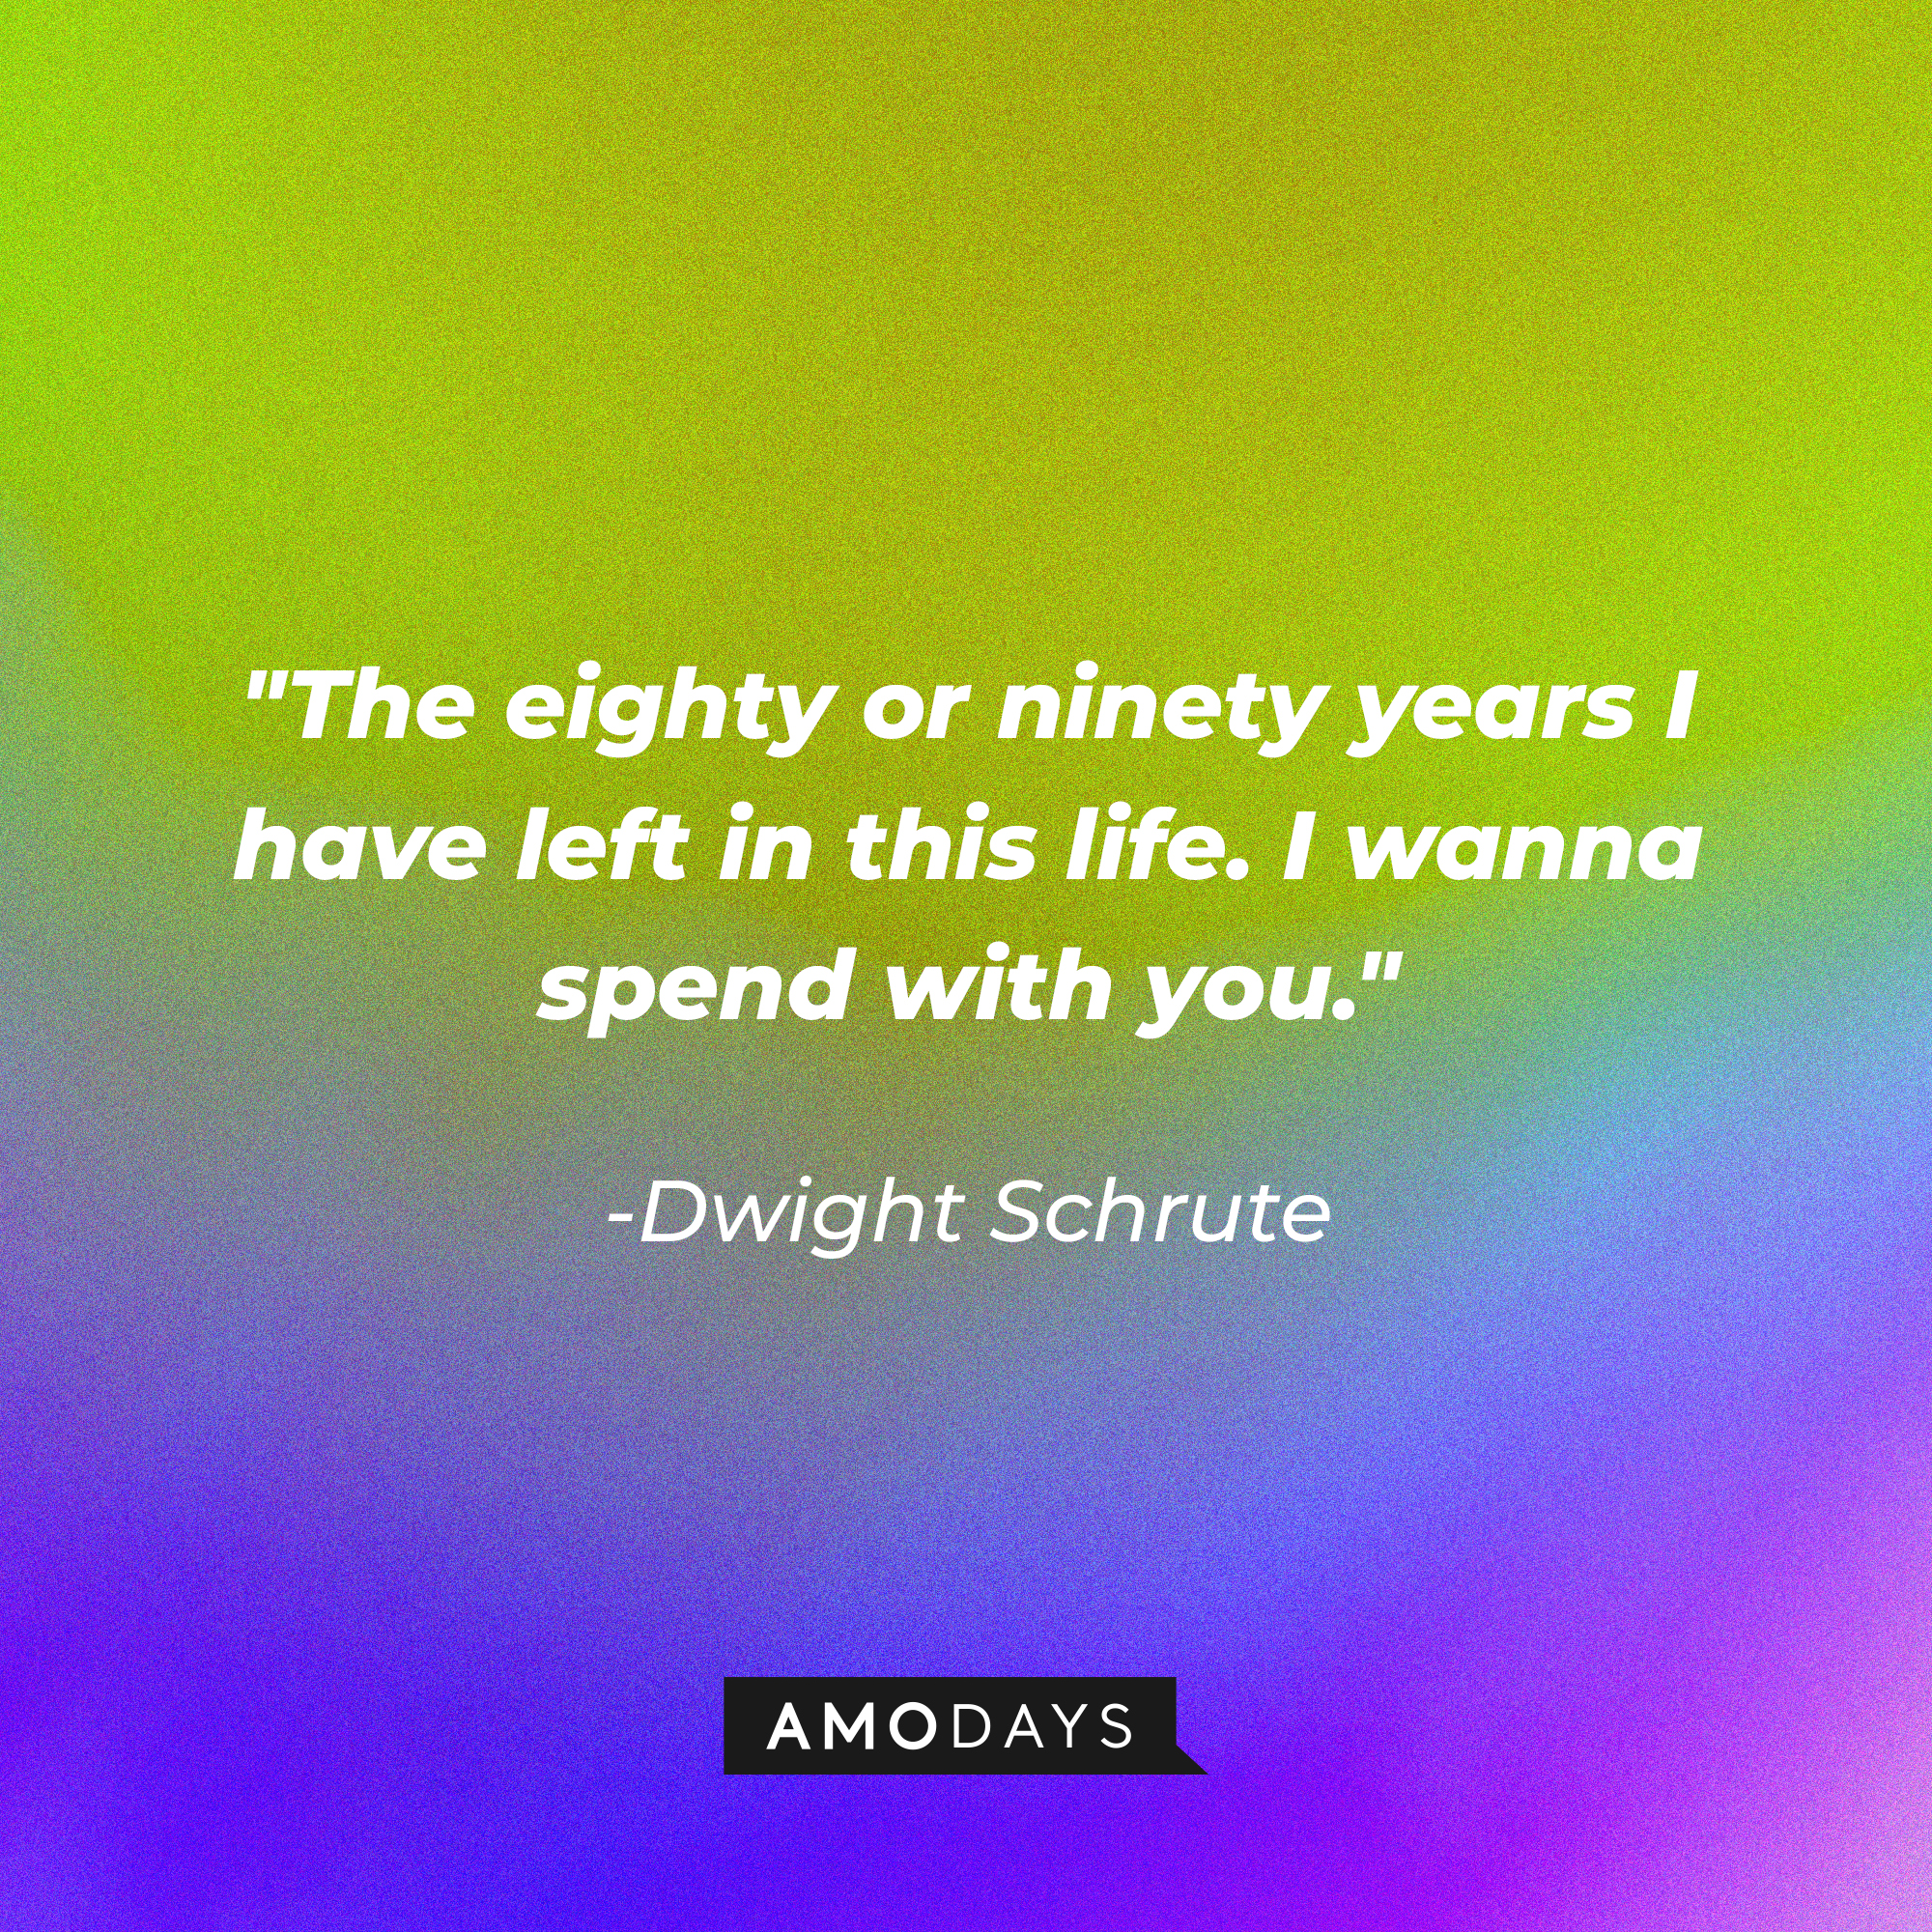 Dwight Schrute’s quote: "The eighty or ninety years I have left in this life. I wanna spend with you." | Image: AmoDays